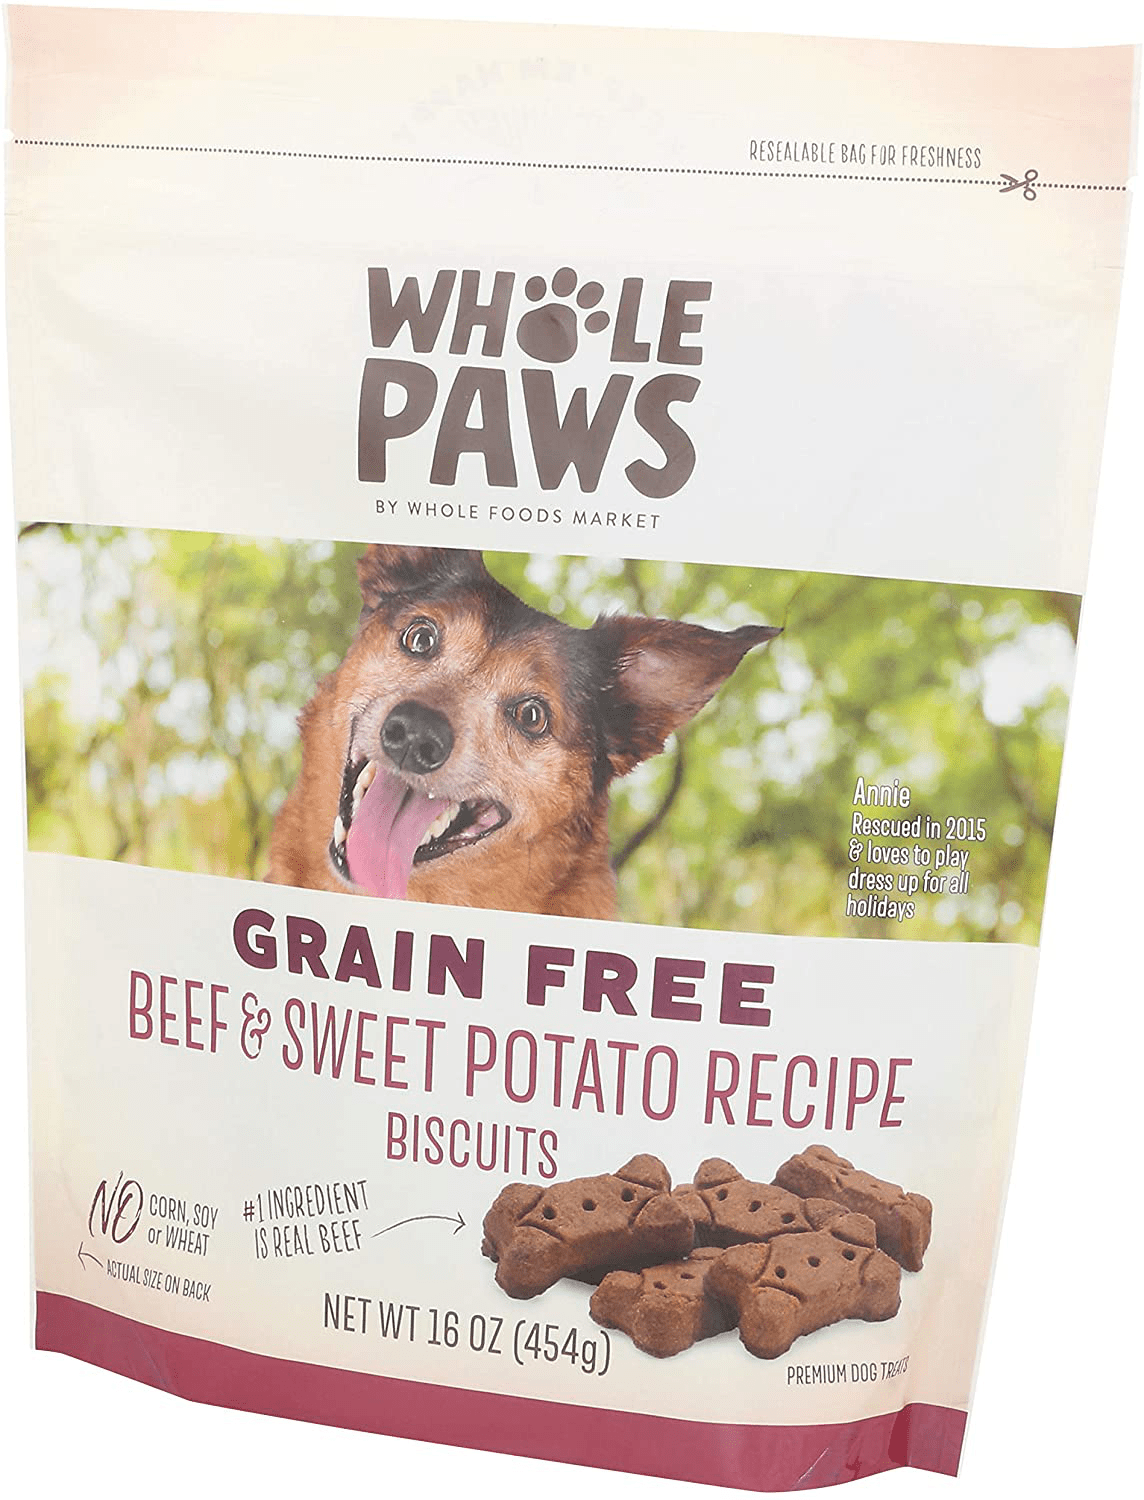 Whole Paws Grain Free Beef & Sweet Potato Recipe Dog Biscuits, 16 Oz